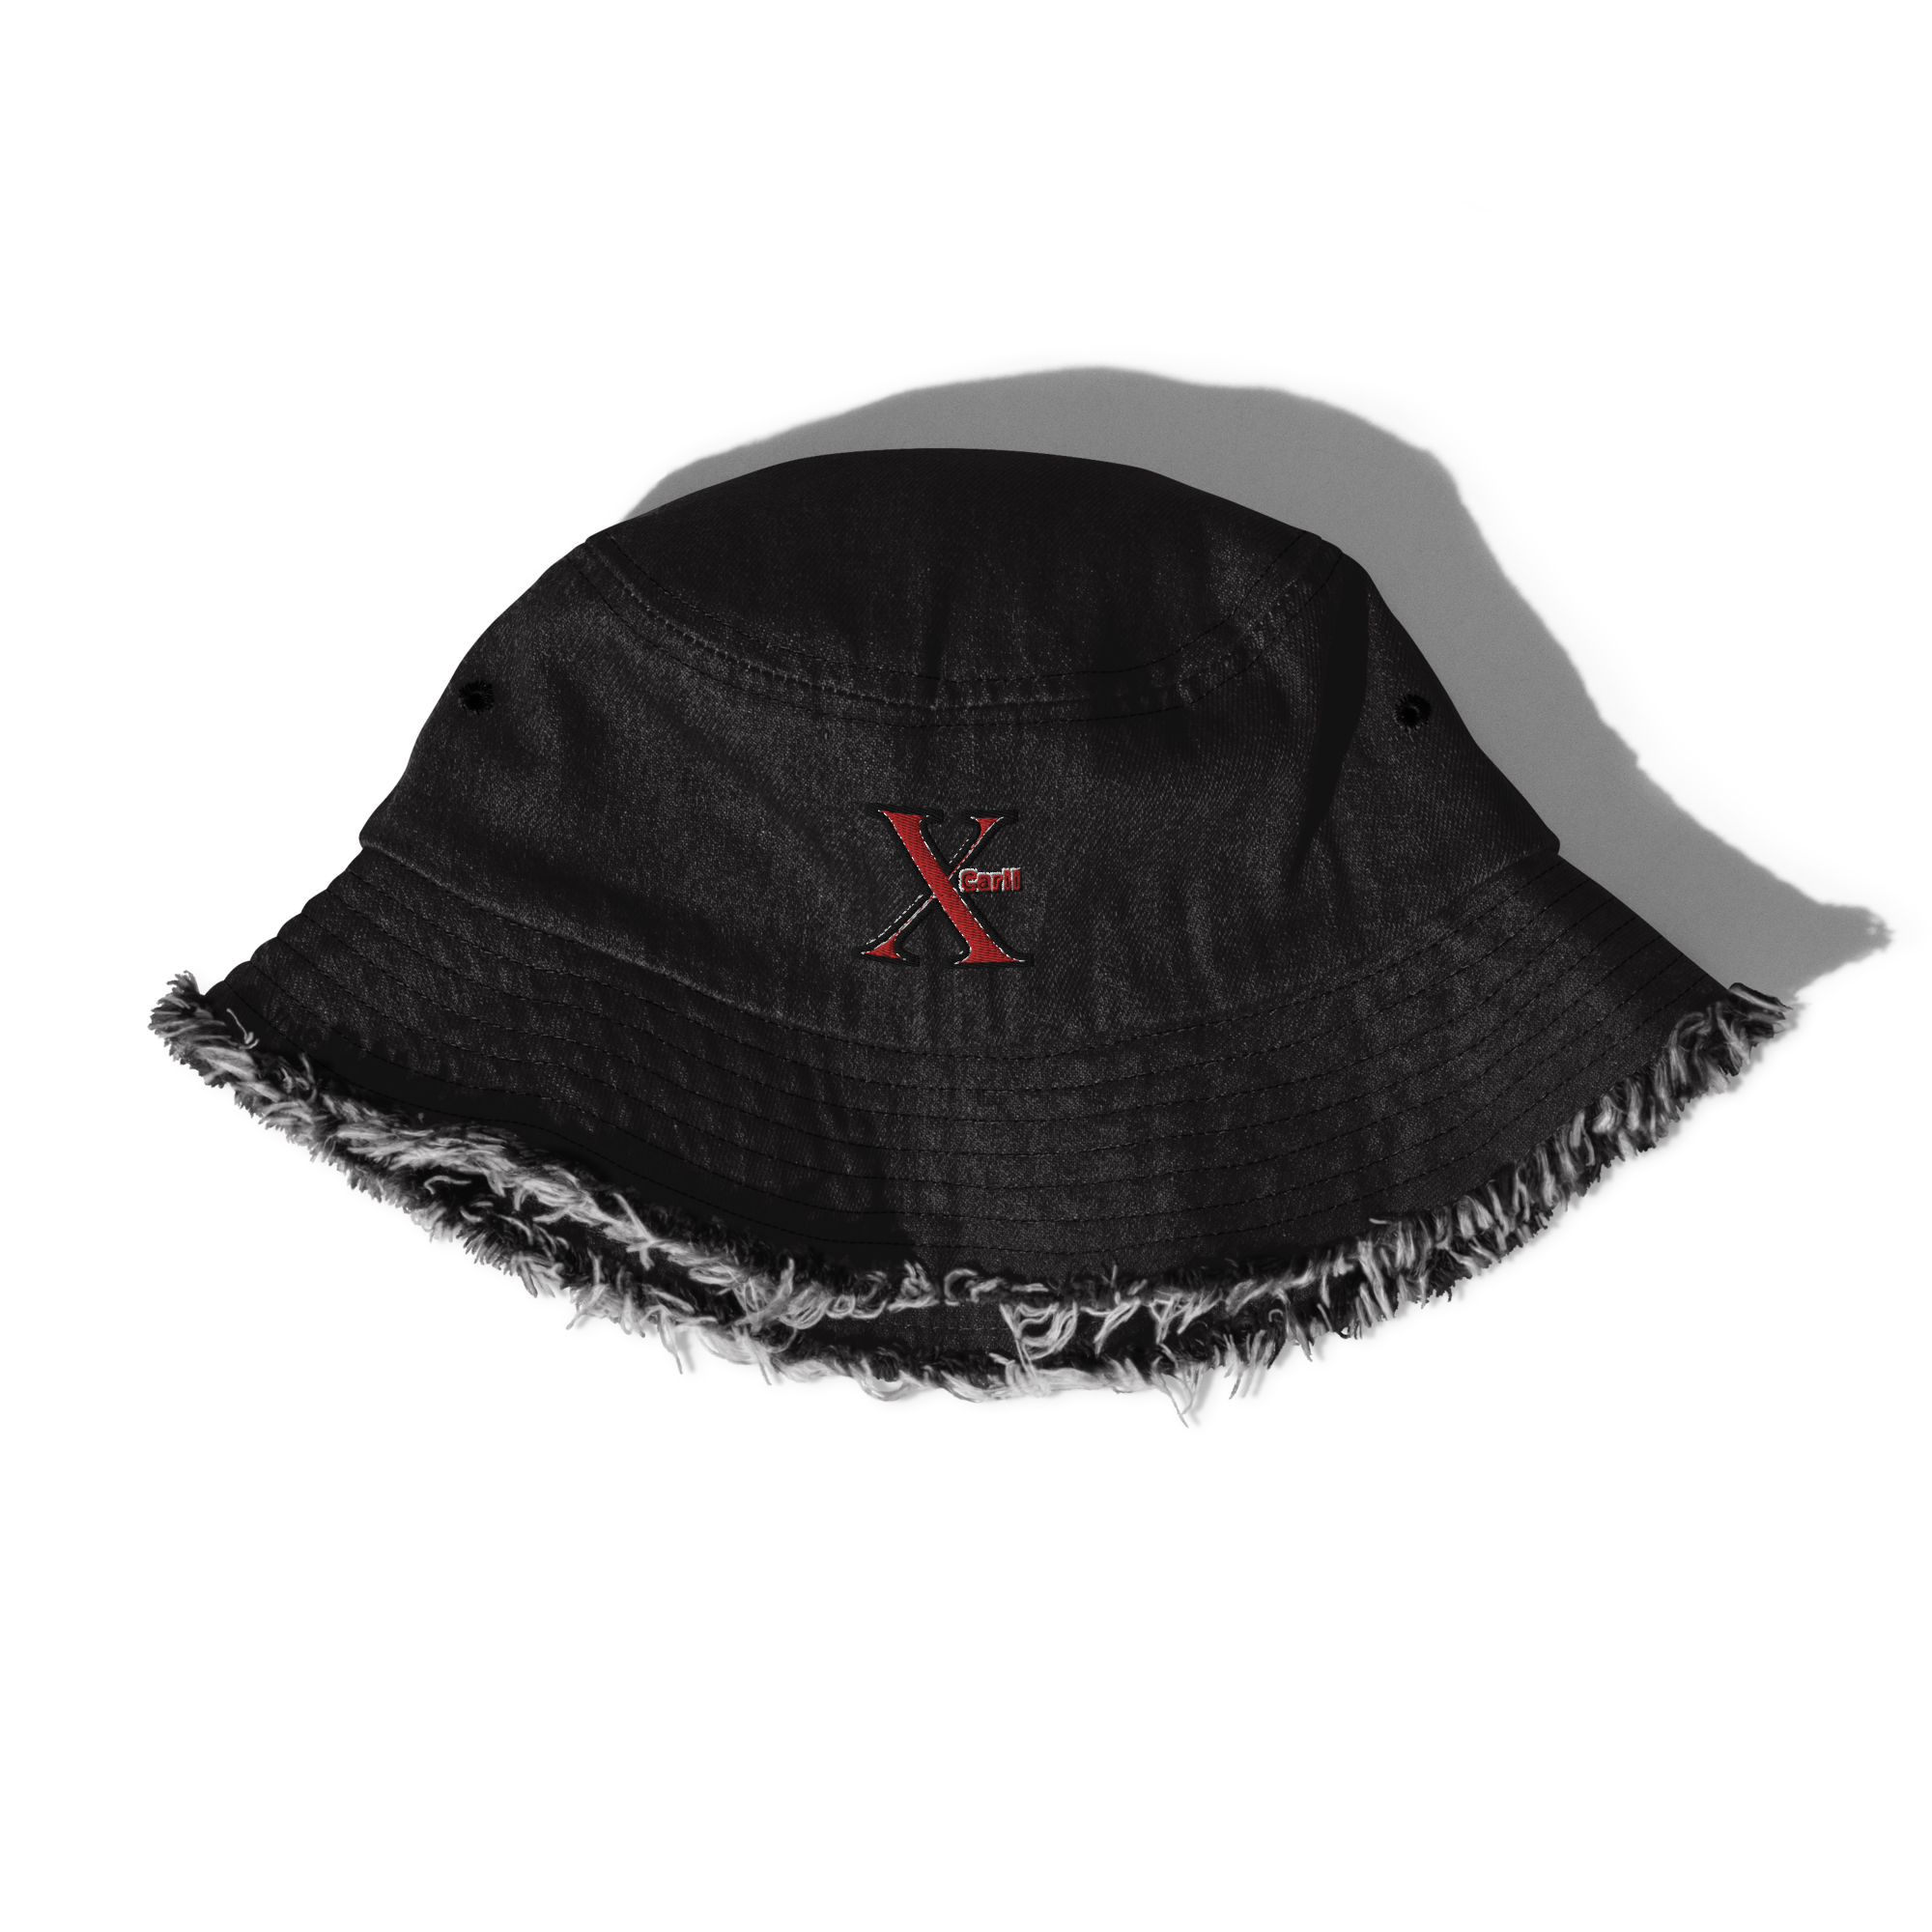 Xcarii Xii - Busted bucket hat